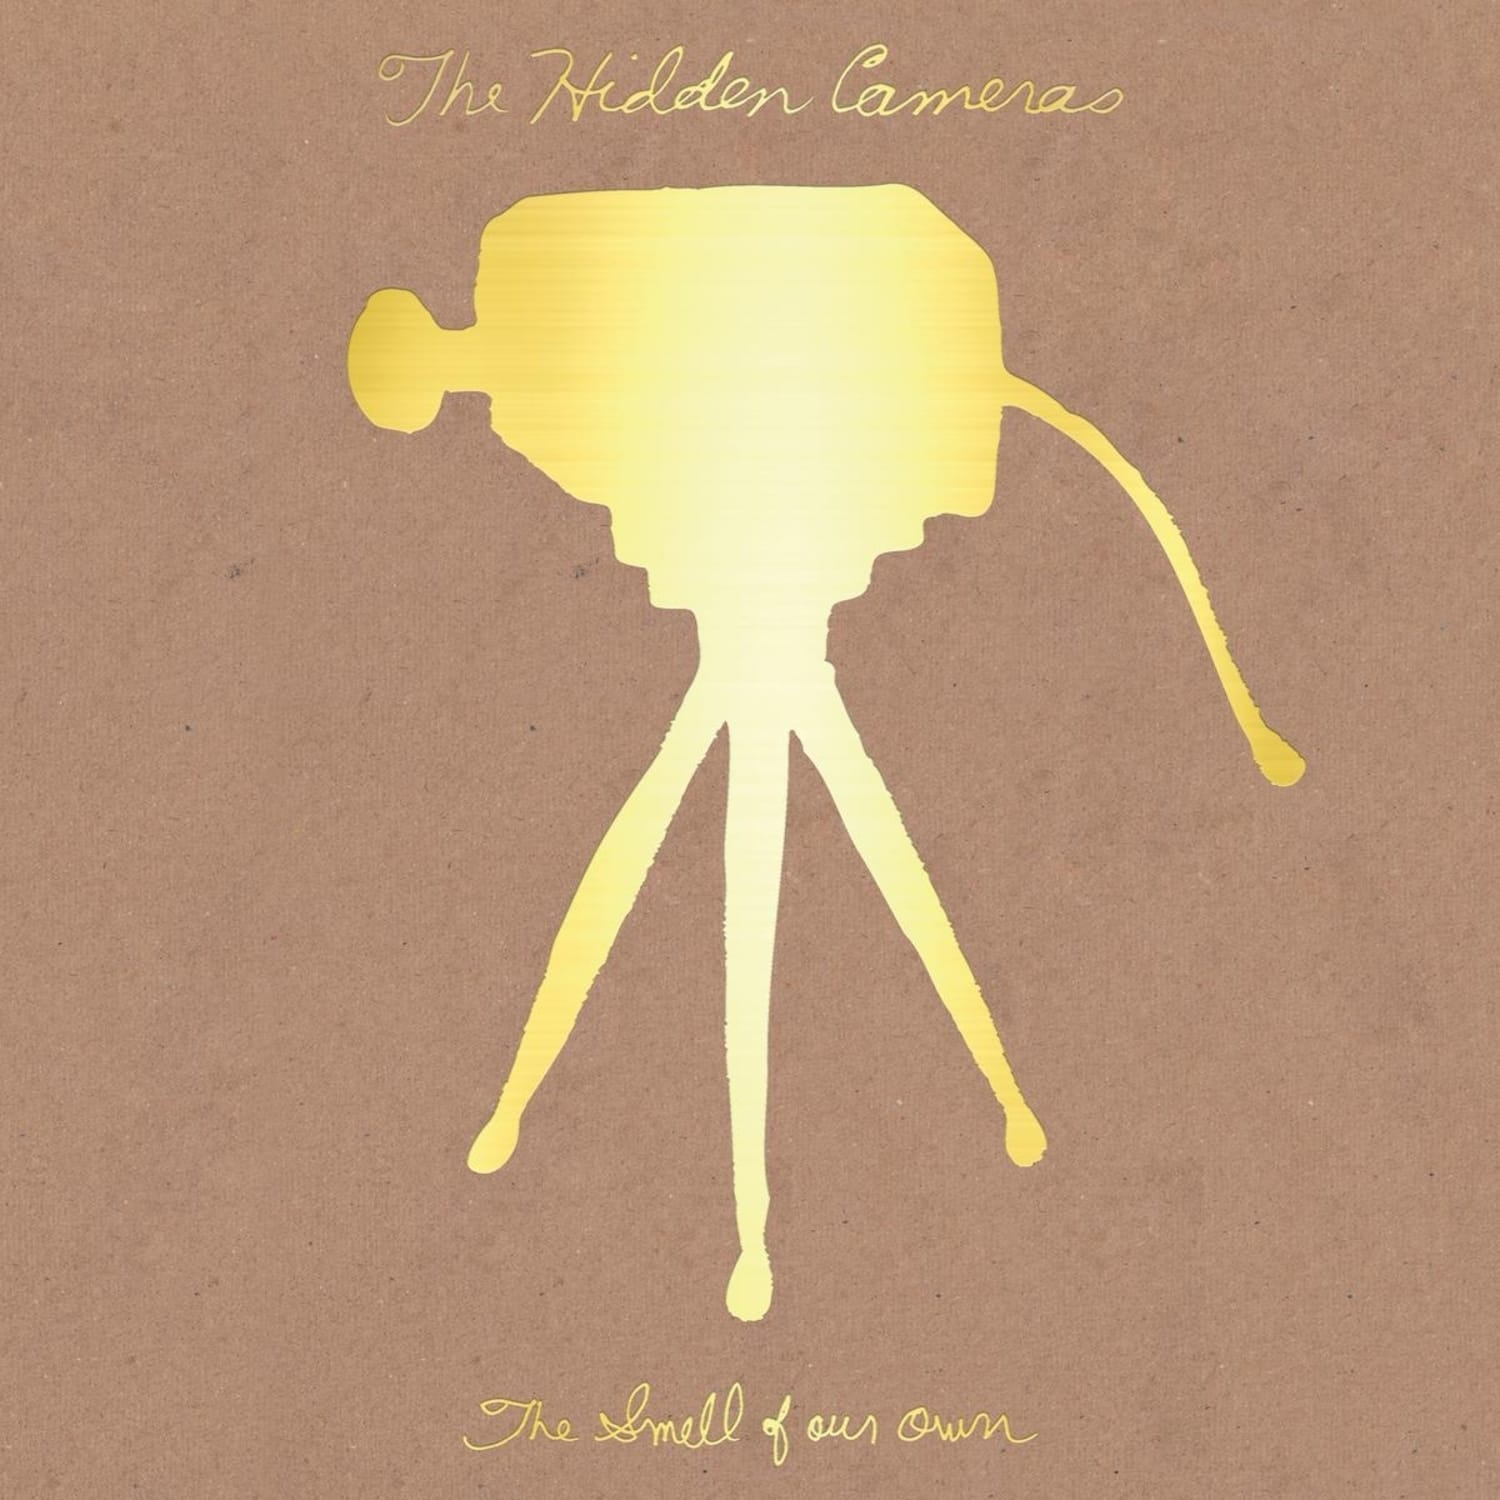 The Hidden Cameras - THE SMELL OF OUR OWN 